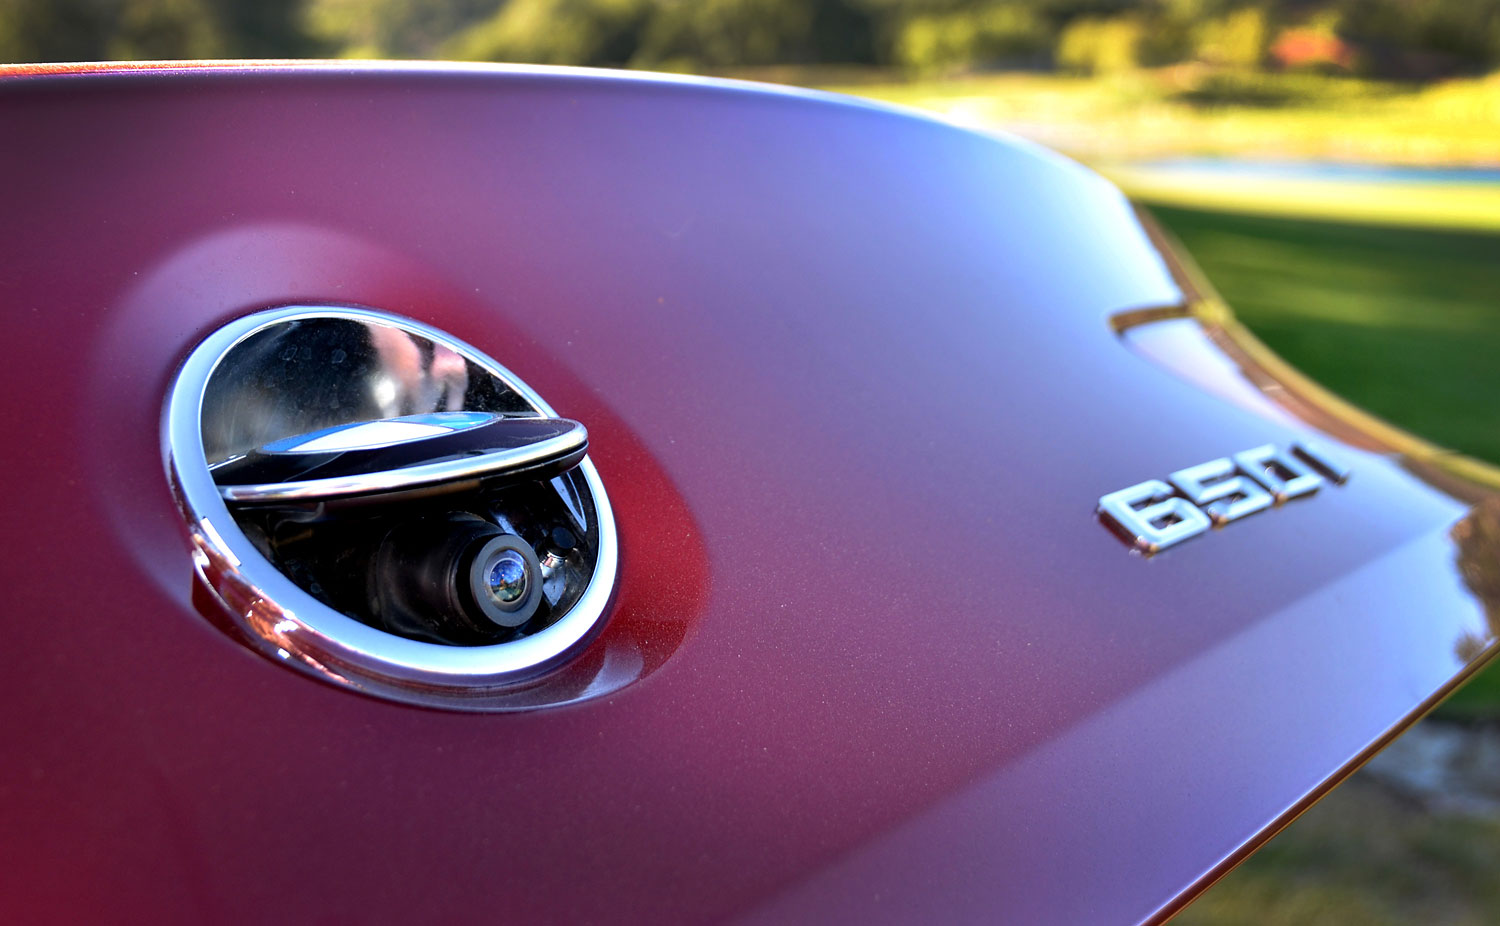 The rear-view camera on the trunklid of the 2012 BMW 650i Coupe. (Mark Elias—Bloomberg via Getty Images)